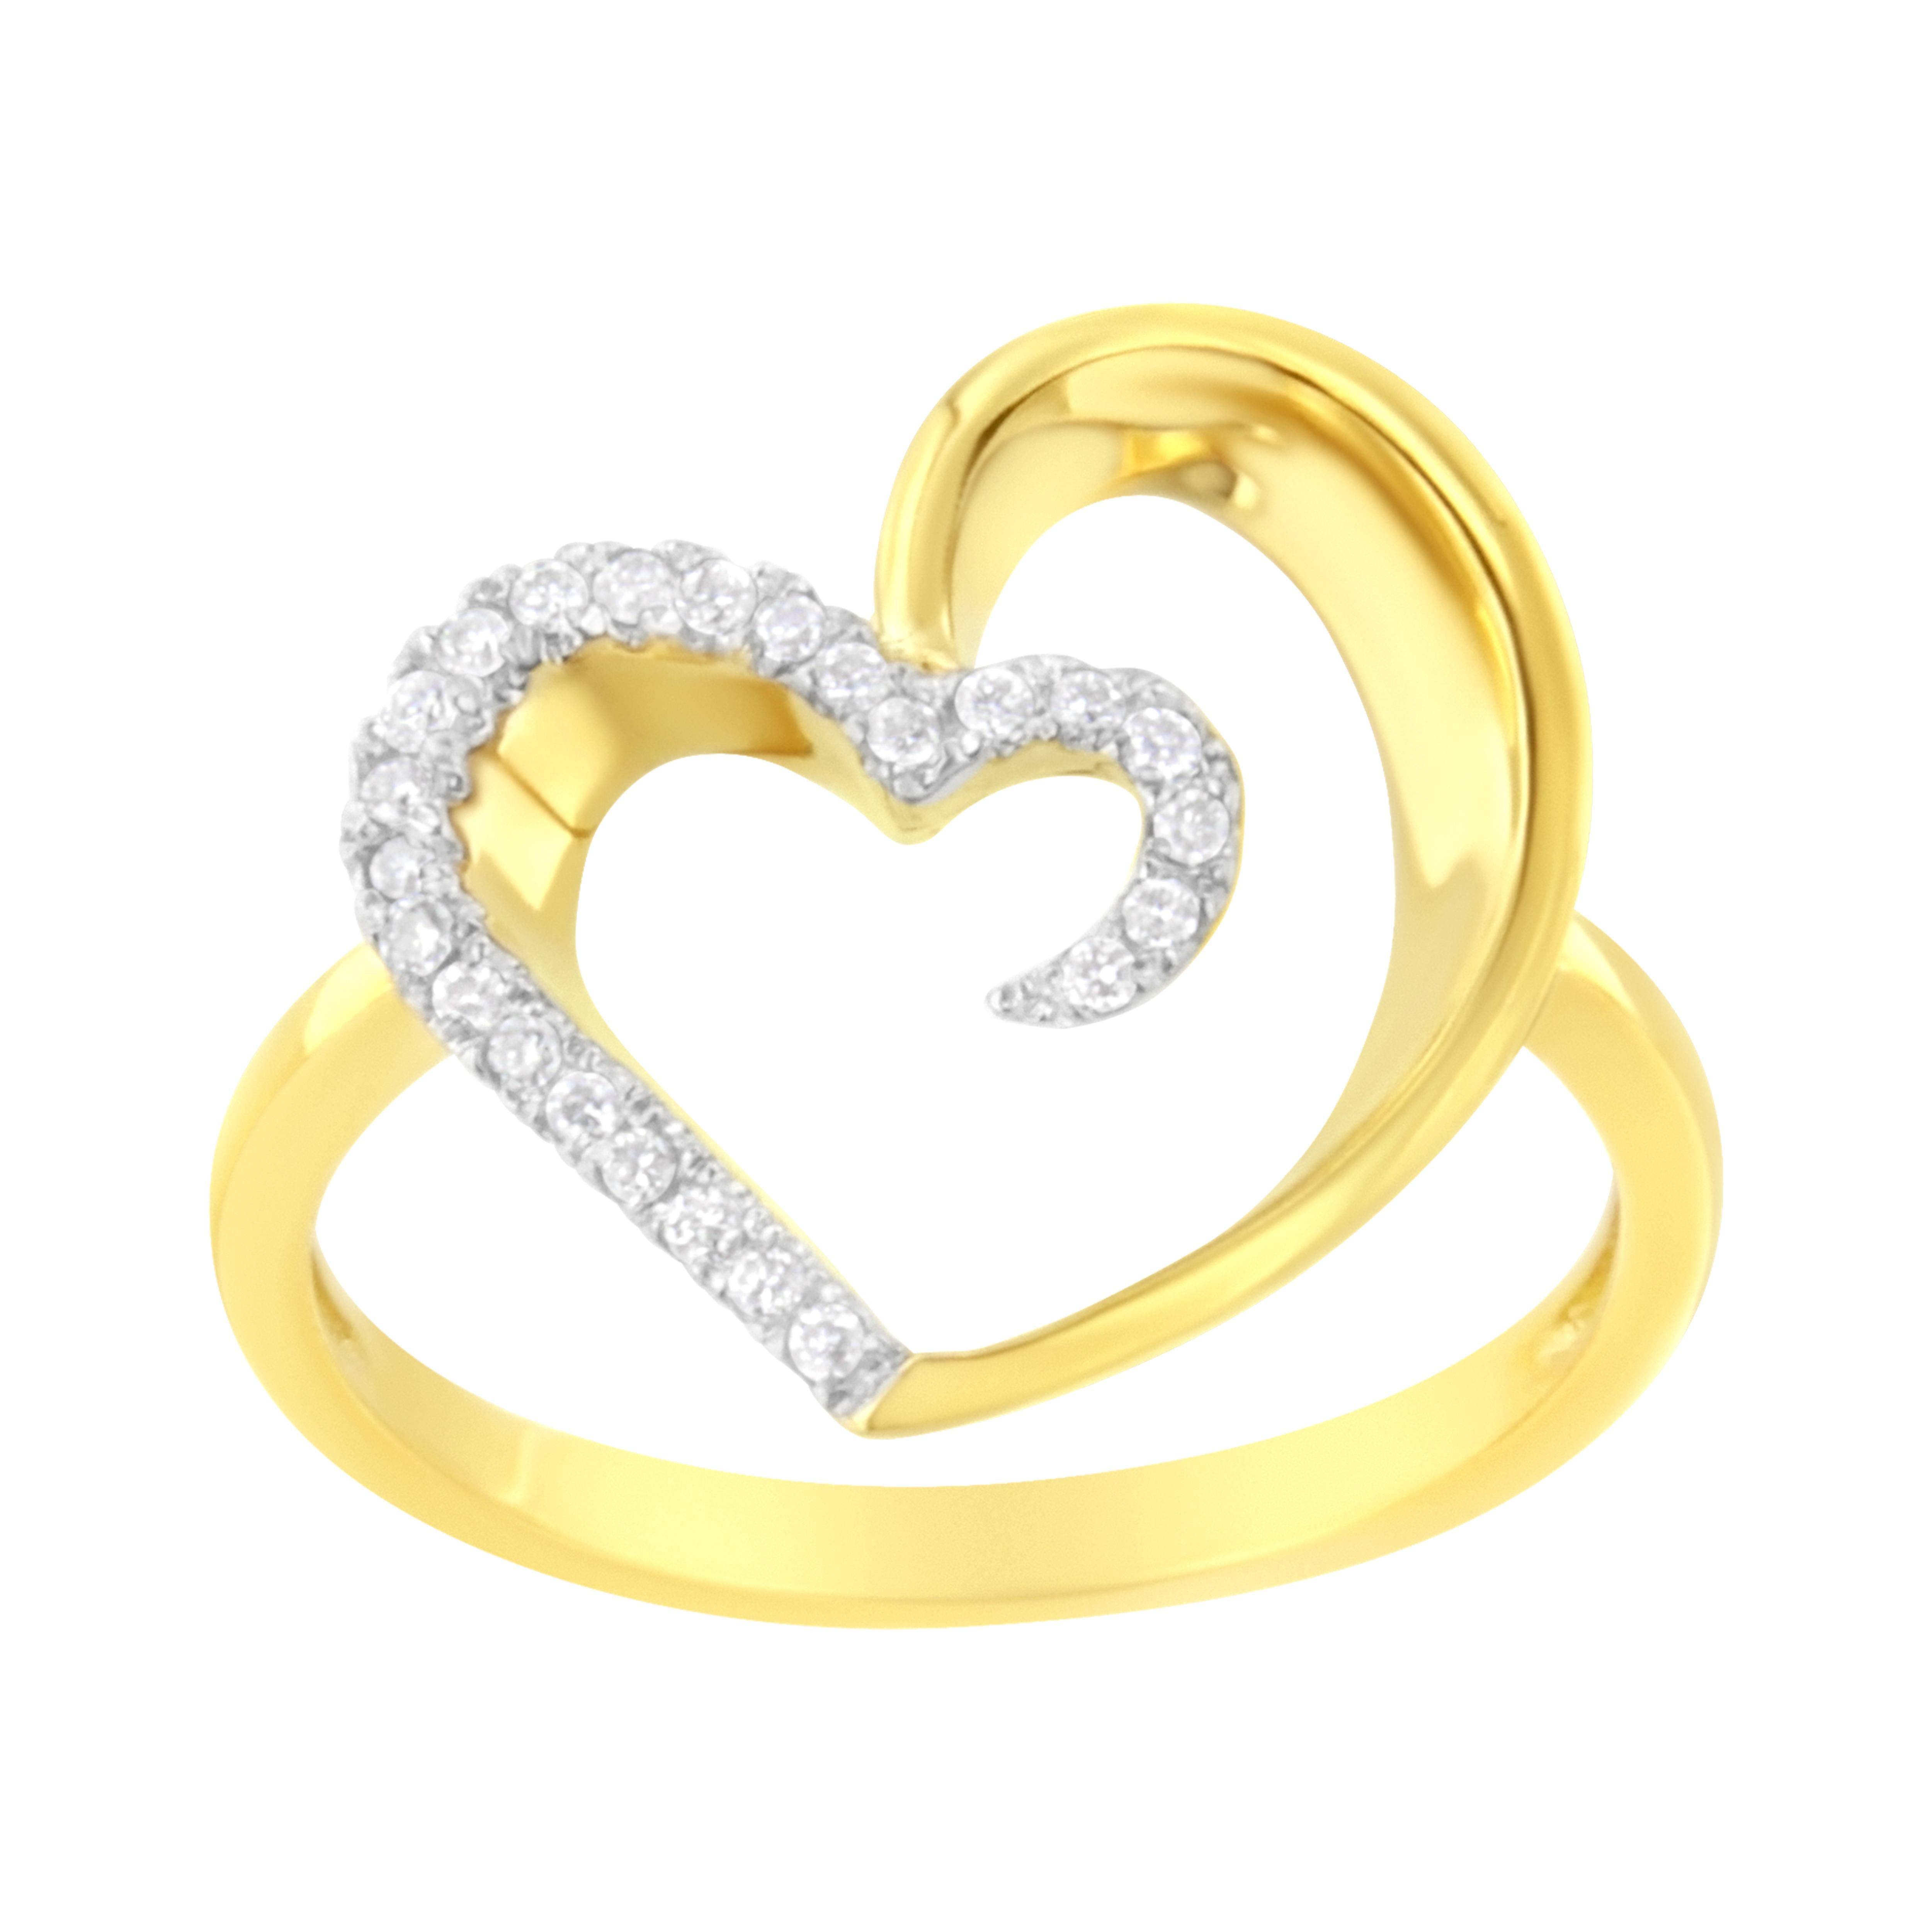 Surprise her with this romantic Diamond Heart Ring, a perfect symbol of love. This modish heart ring showcases 24 brilliant round cut diamonds fashioned in luminous 14 karat yellow gold band in beautiful pave setting. Total diamond weight is 1/10